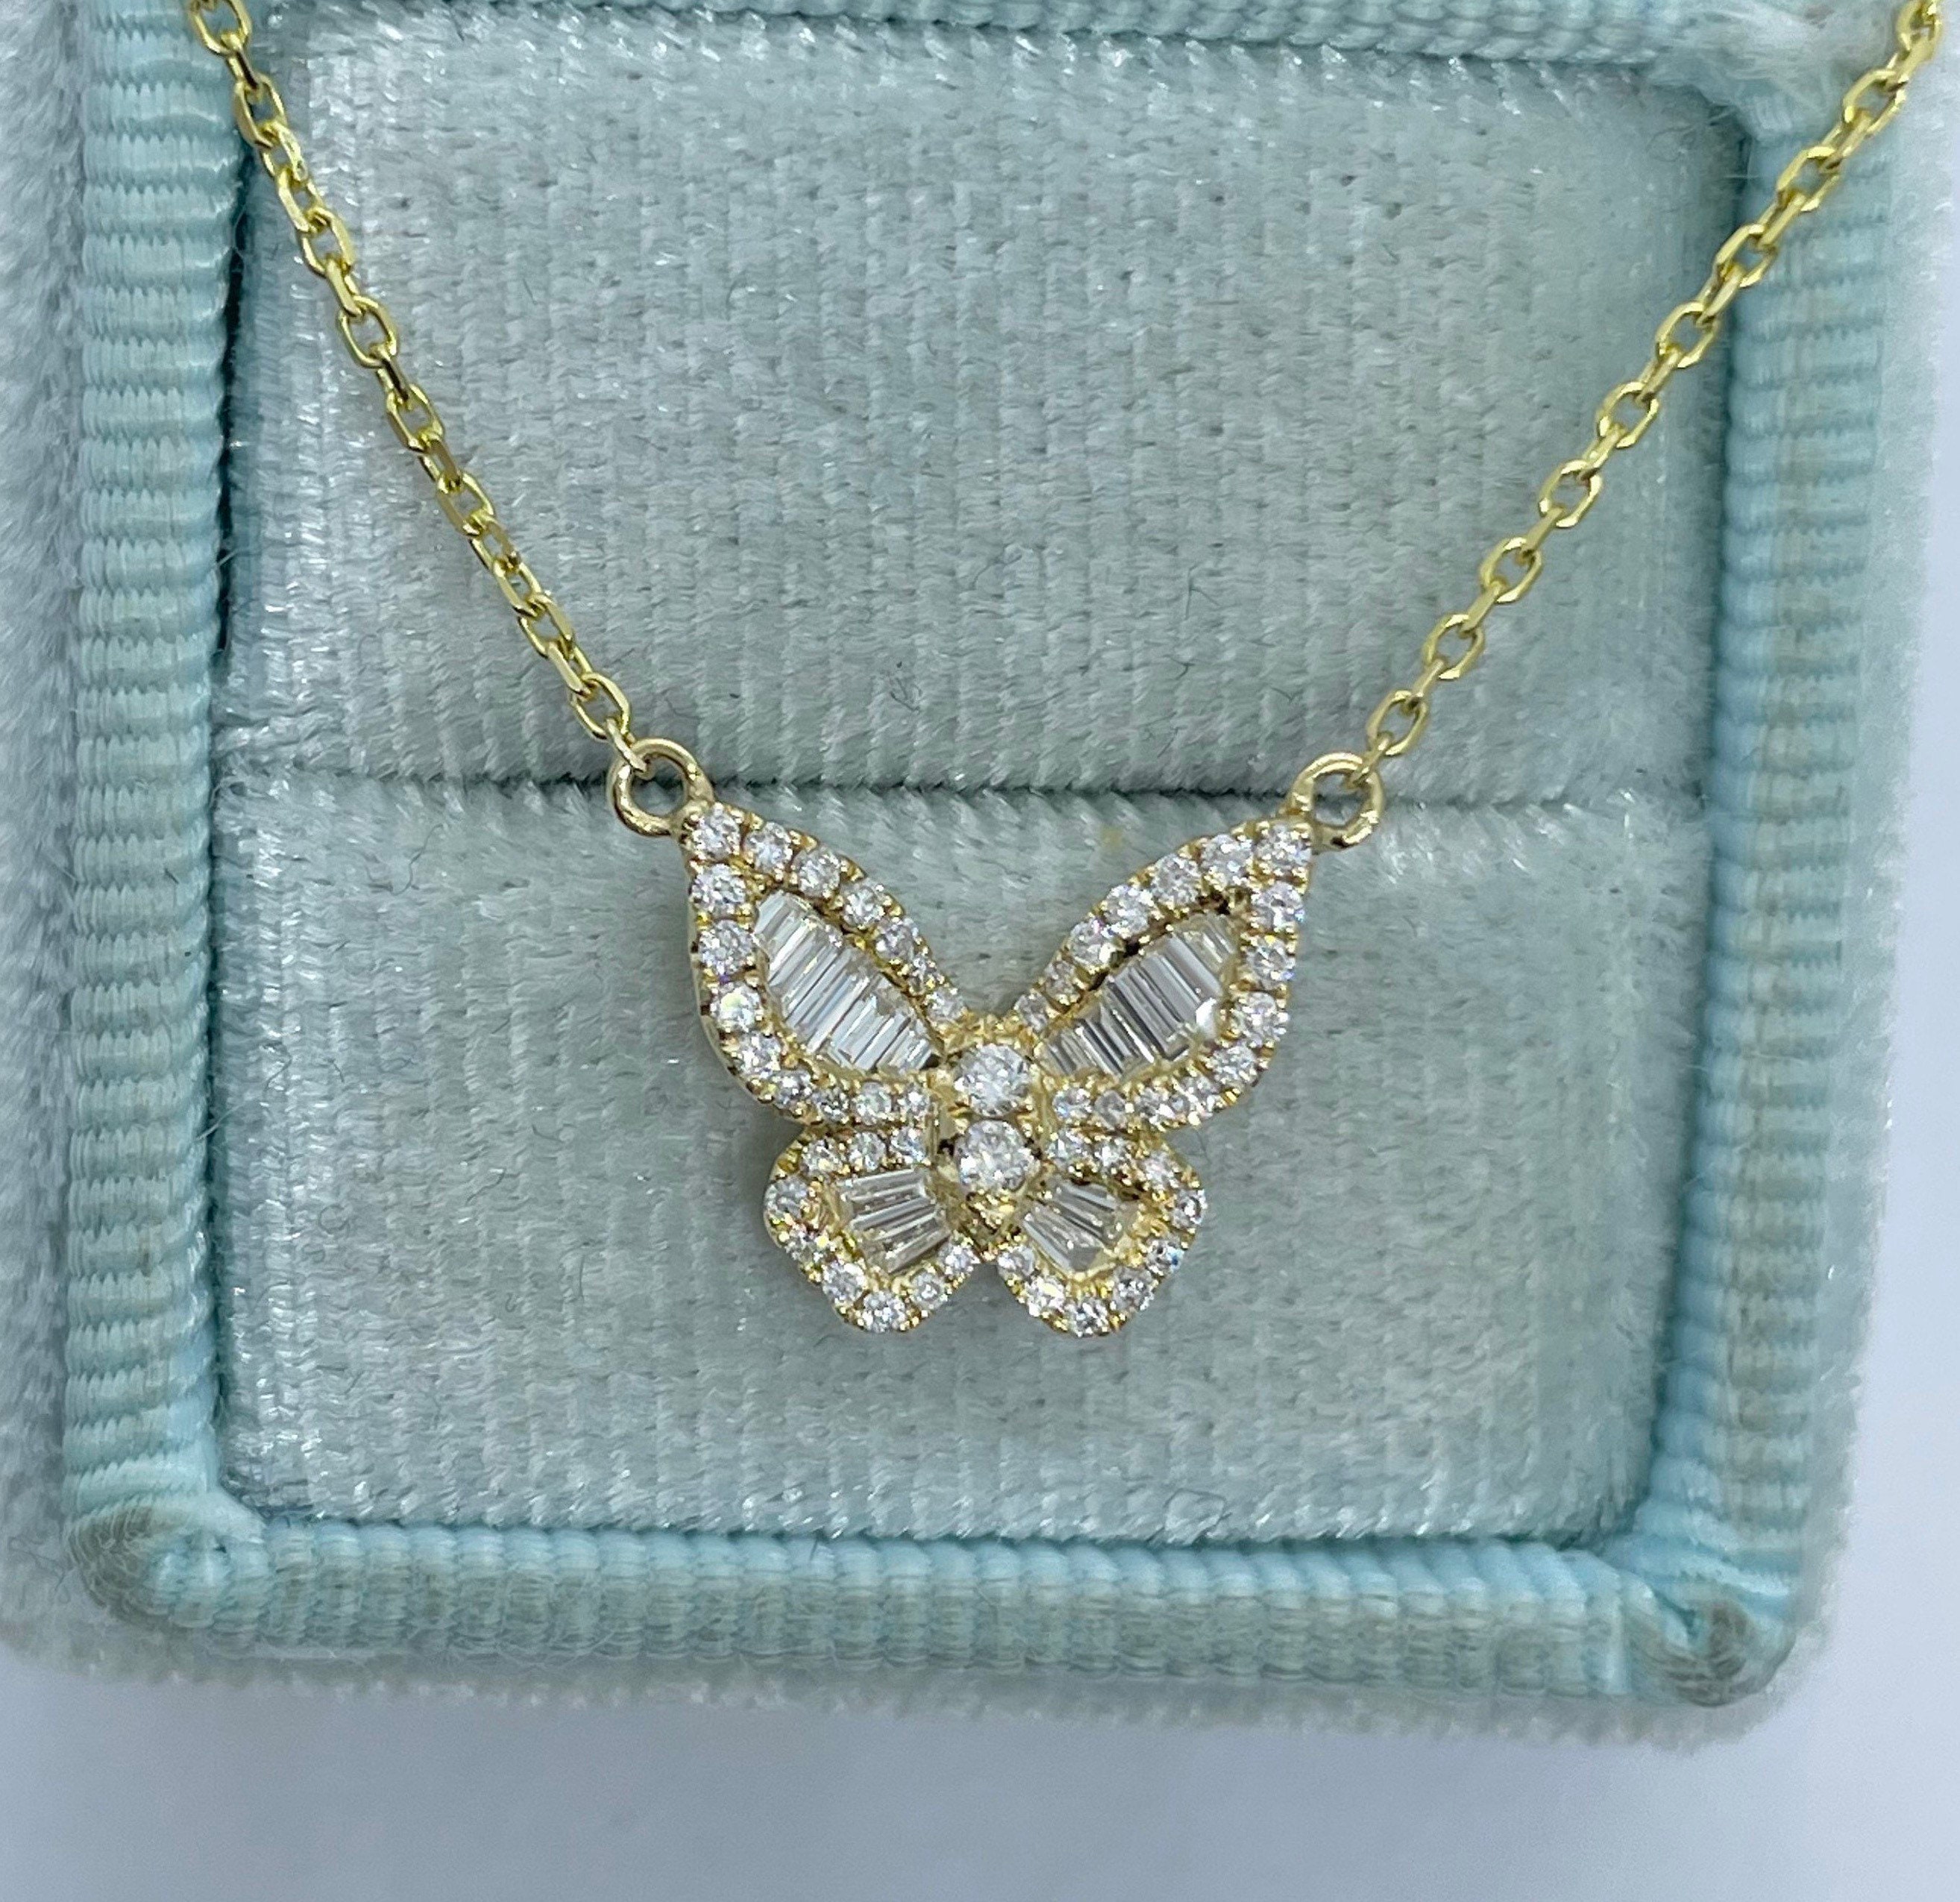 Signature Cleat Necklace with Diamonds – The Golden Cleat